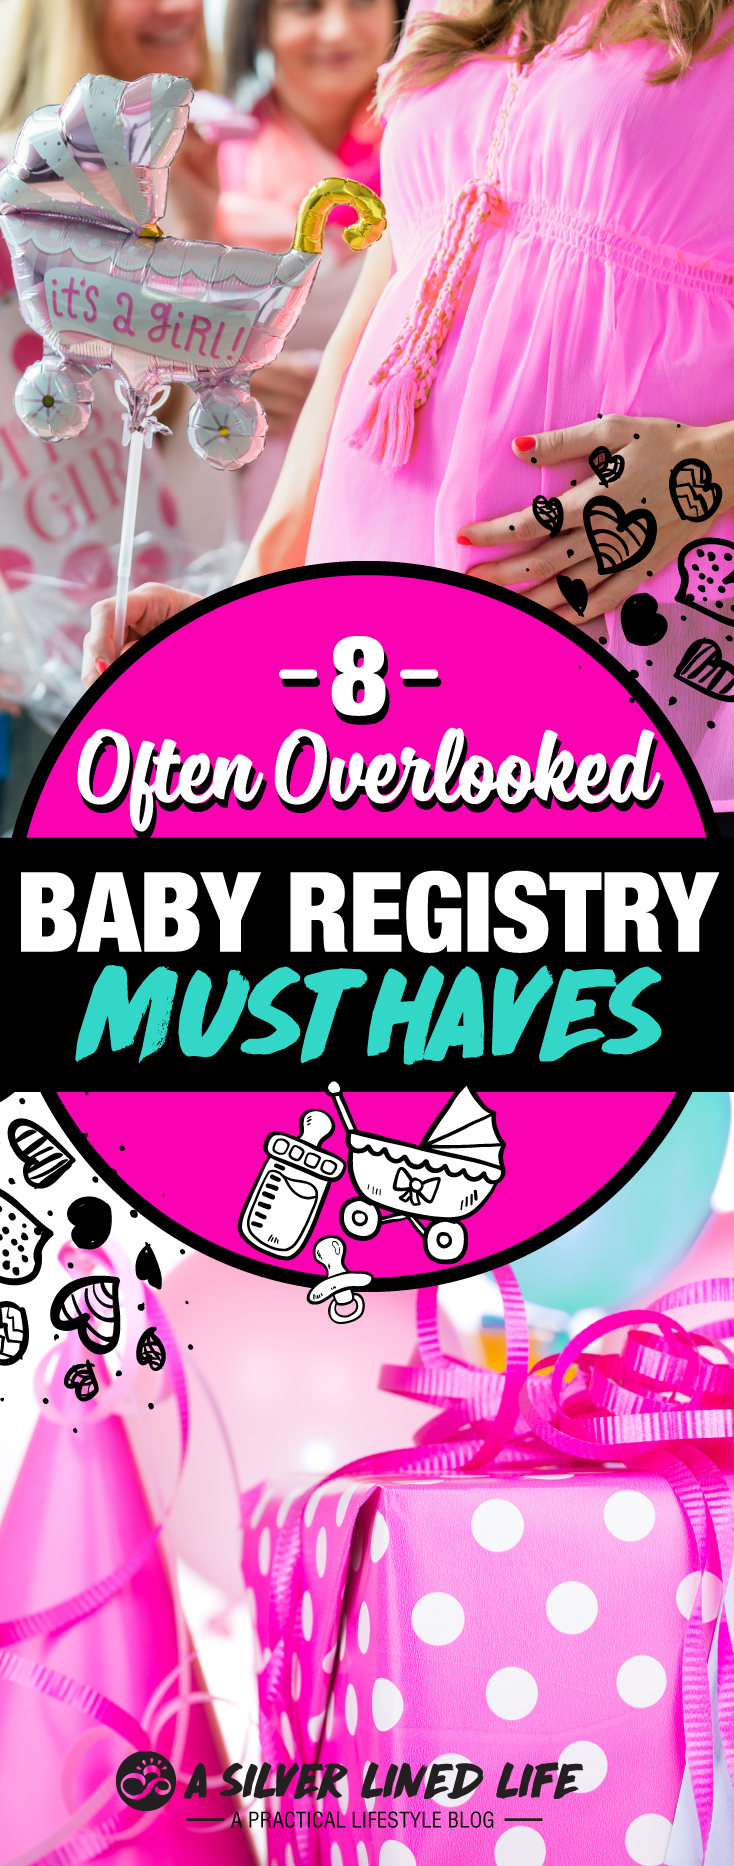 Baby stuff for your baby registry (that are must haves!) and essentials for first time moms, often overlooked! This checklist has the best tips on Amazon items that are life savors! If you’re looking for what to put on your baby registry, look no further! Love this!